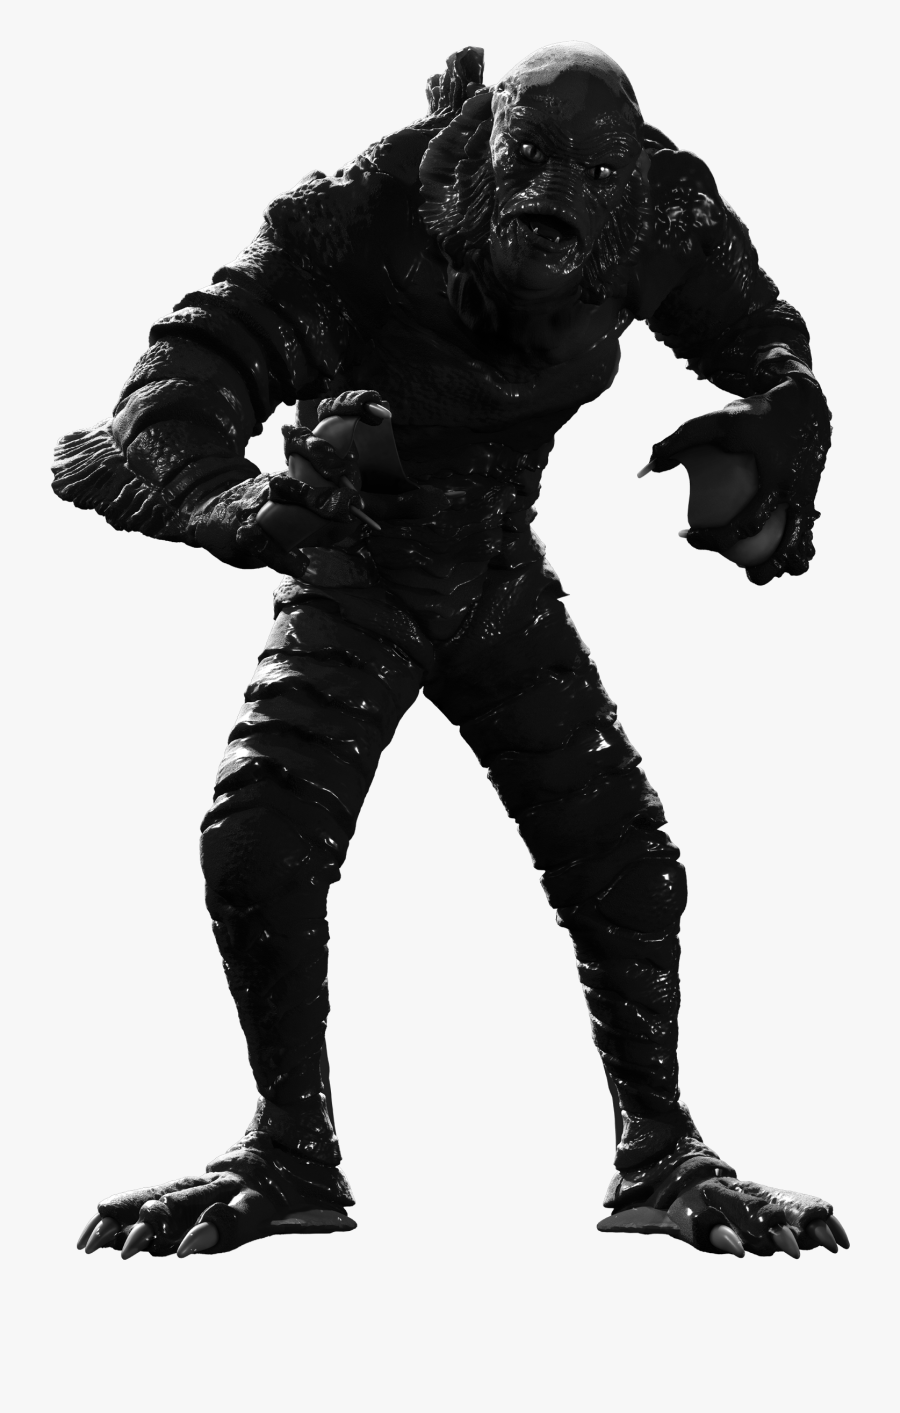 01 Character Creature Blacklagoon Thumbnail - Creature From The Black Lagoon Png, Transparent Clipart